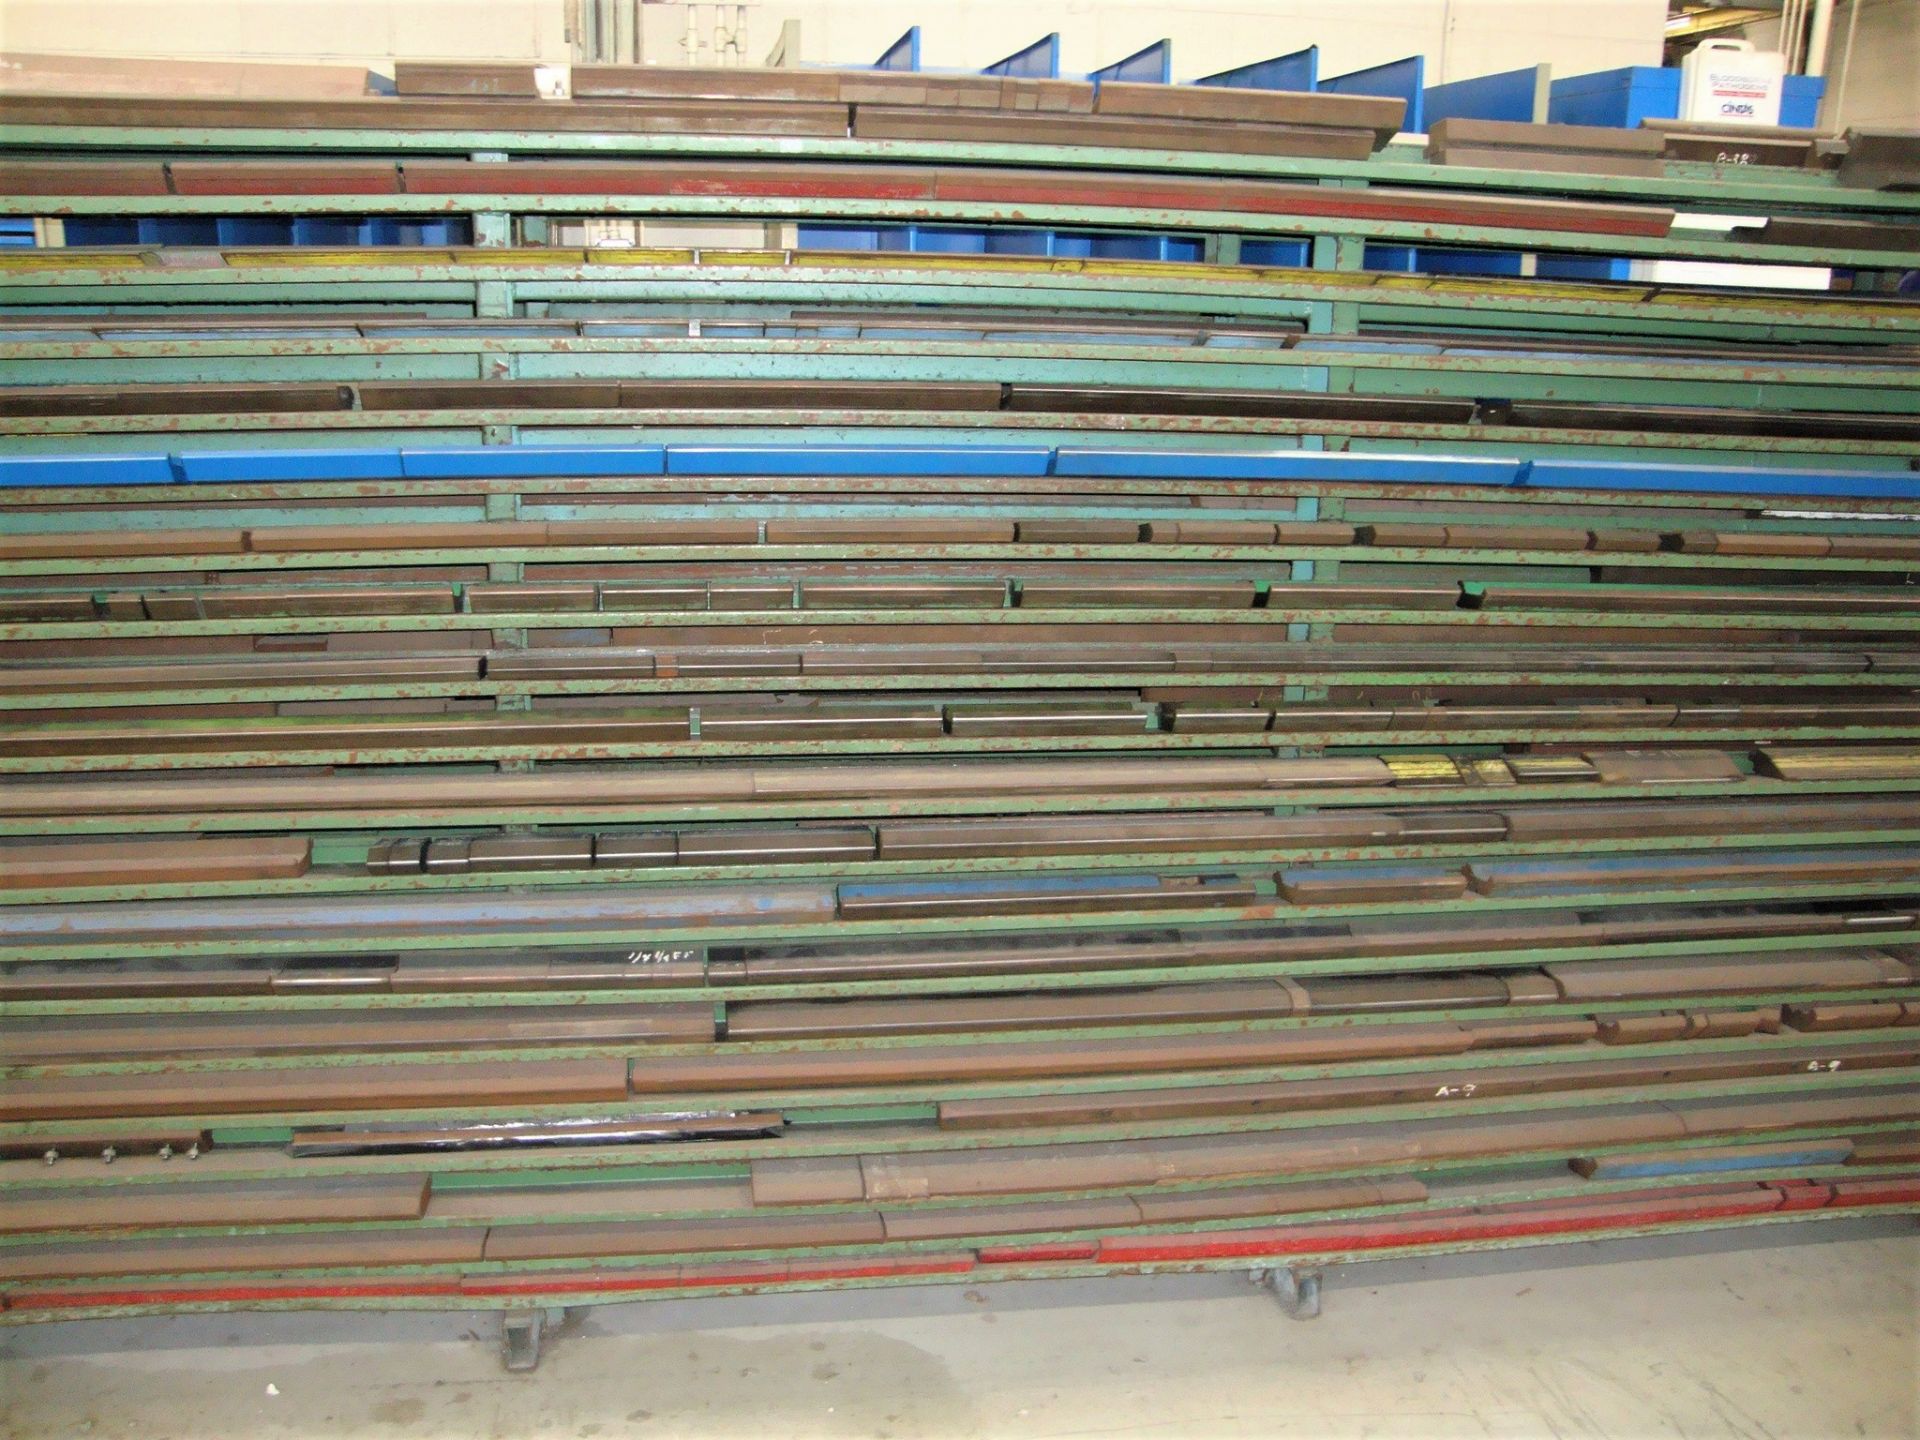 Lot of approx. 248 Assorted Press Brake Dies, up to 68" long Note-Rack NOT Included - Image 4 of 16